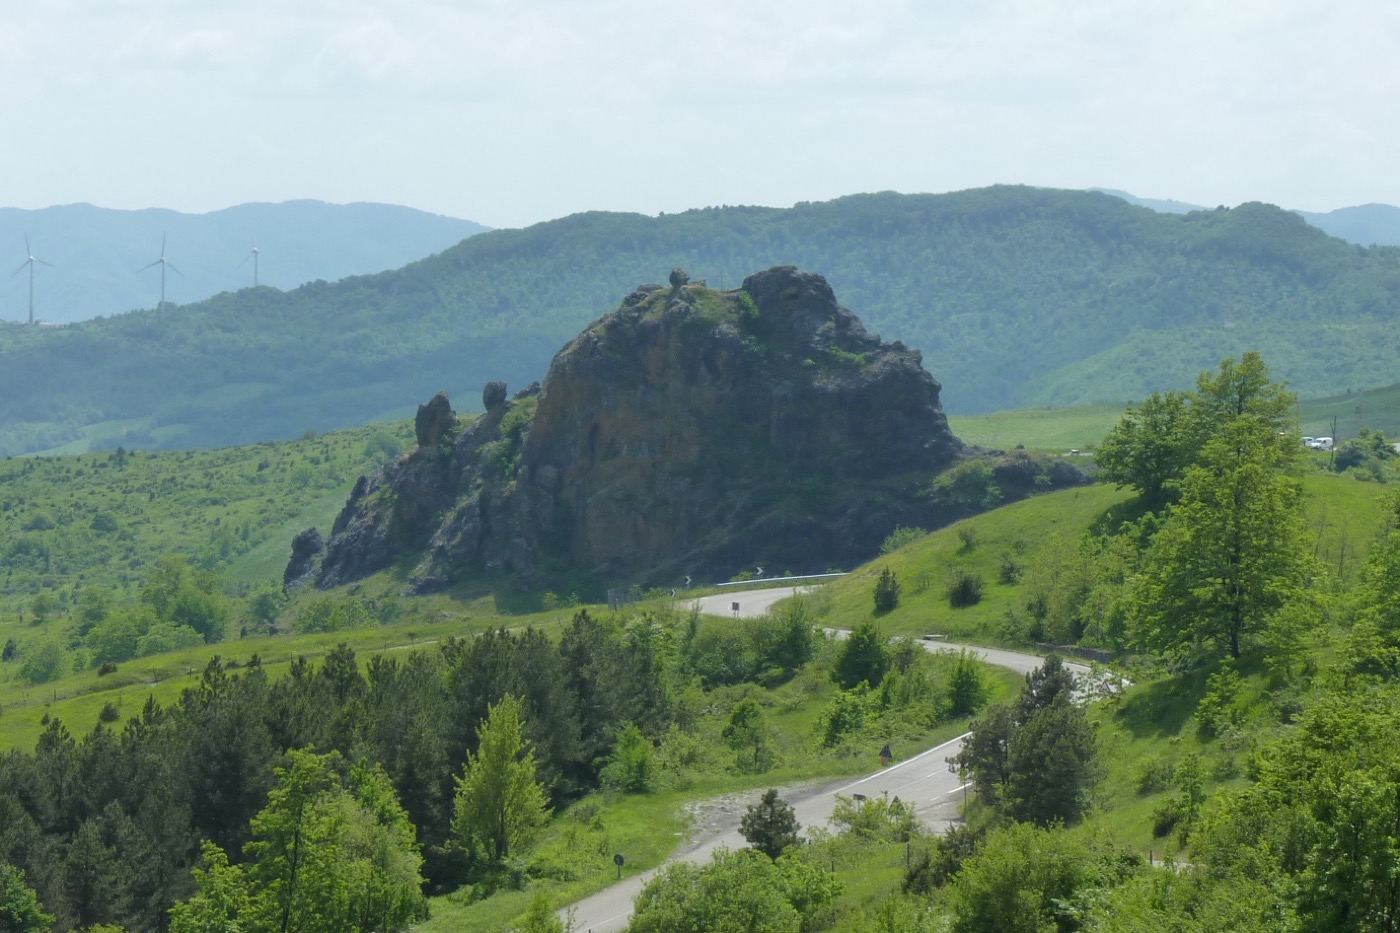 An outcropping of rocks amidst a lush landscape